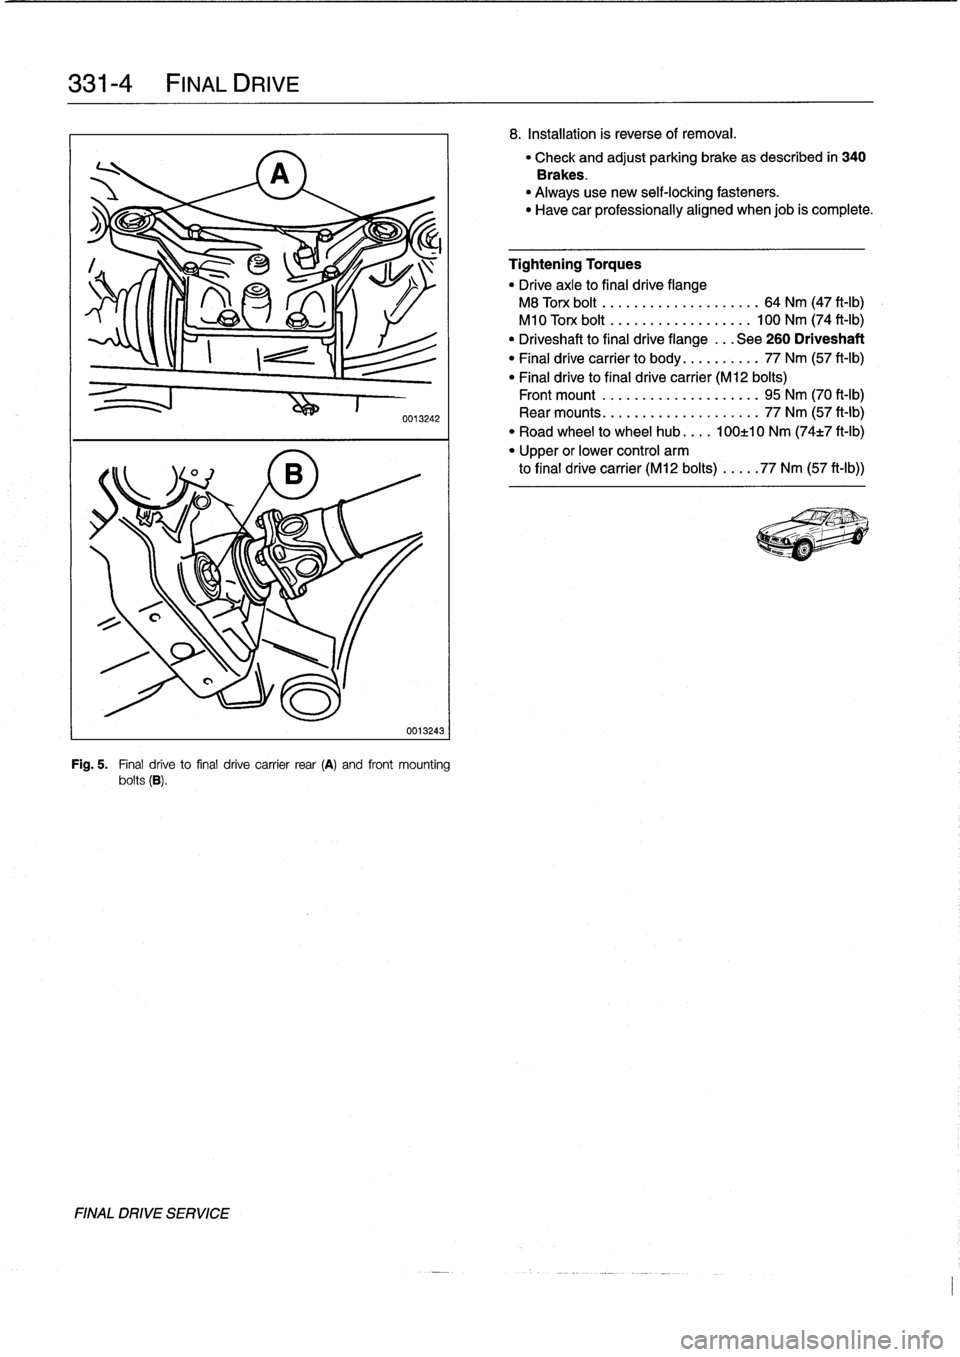 BMW 328i 1995 E36 Owners Manual 
331-
4

	

FINAL
DRIVE

FINAL
DRIVE
SERVICE

0013242
0013243

Fig
.
5
.

	

Final
drive
to
final
drive
carrier
rear
(A)
and
front
mounting
bolts
(B)
.

8
.
Installation
is
reverse
of
removal
.

"
Che